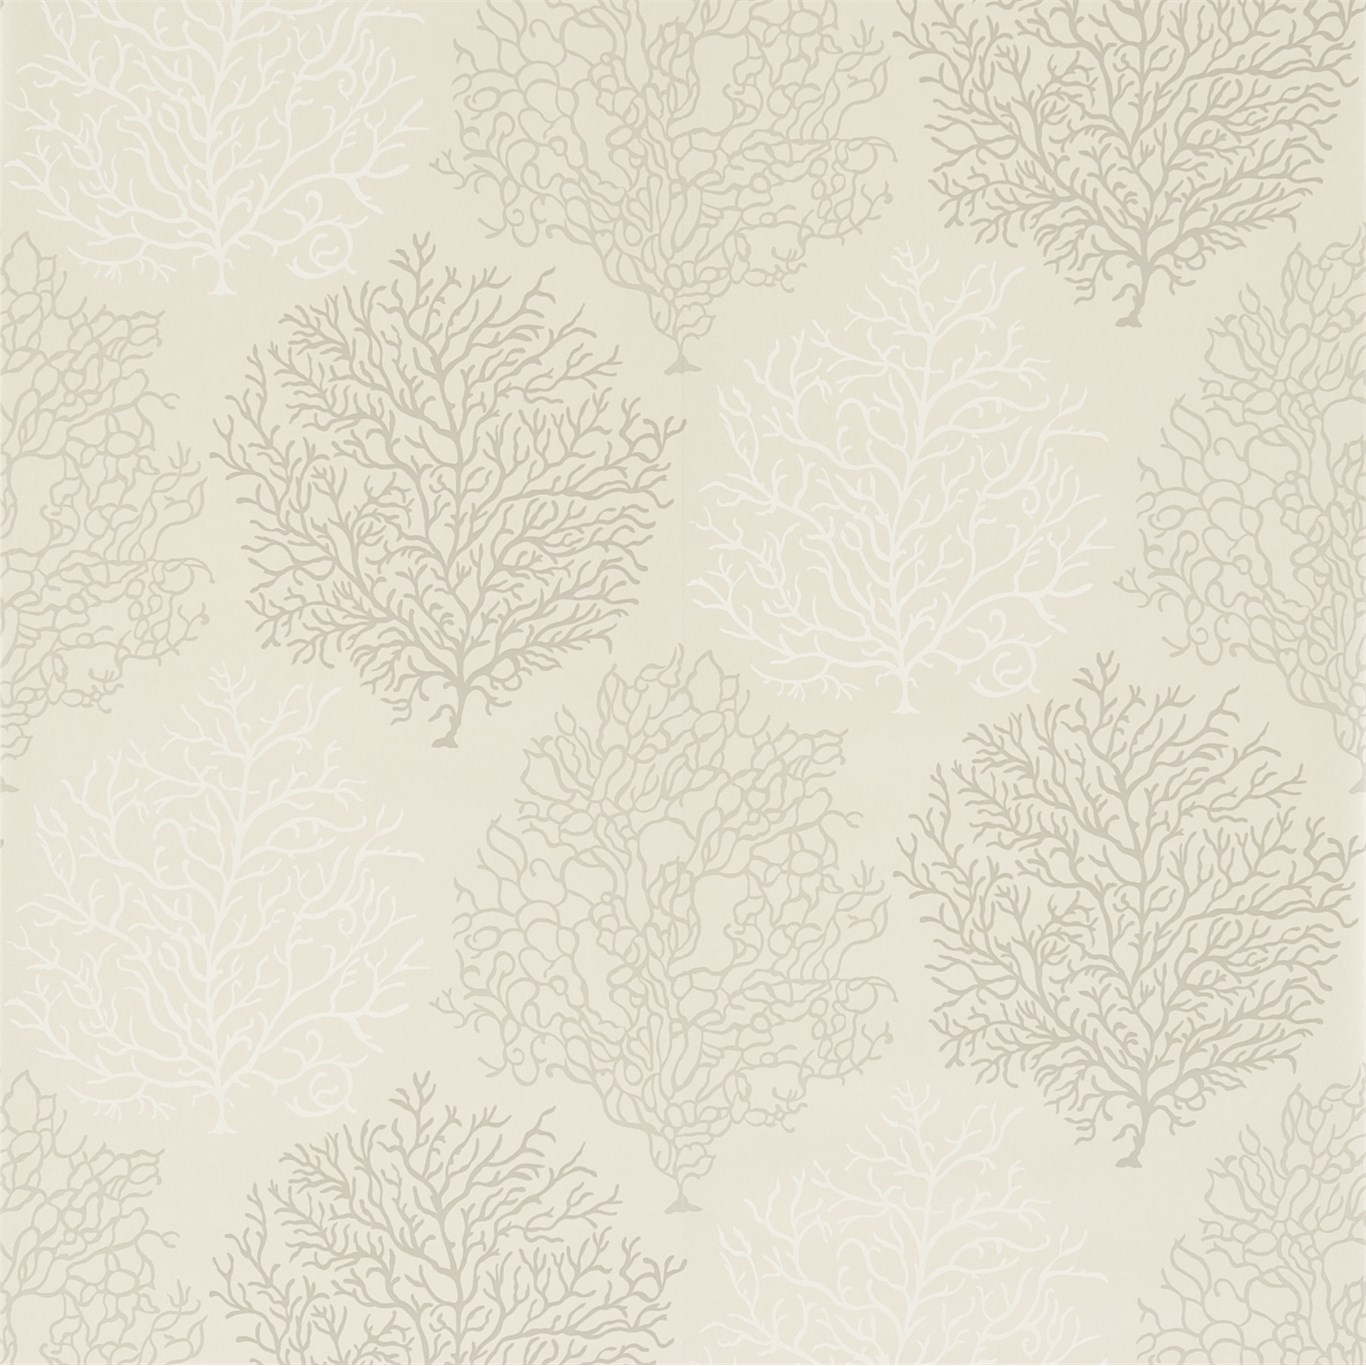 Sanderson Voyage of Discovery Wallpaper Coral Reef 213395